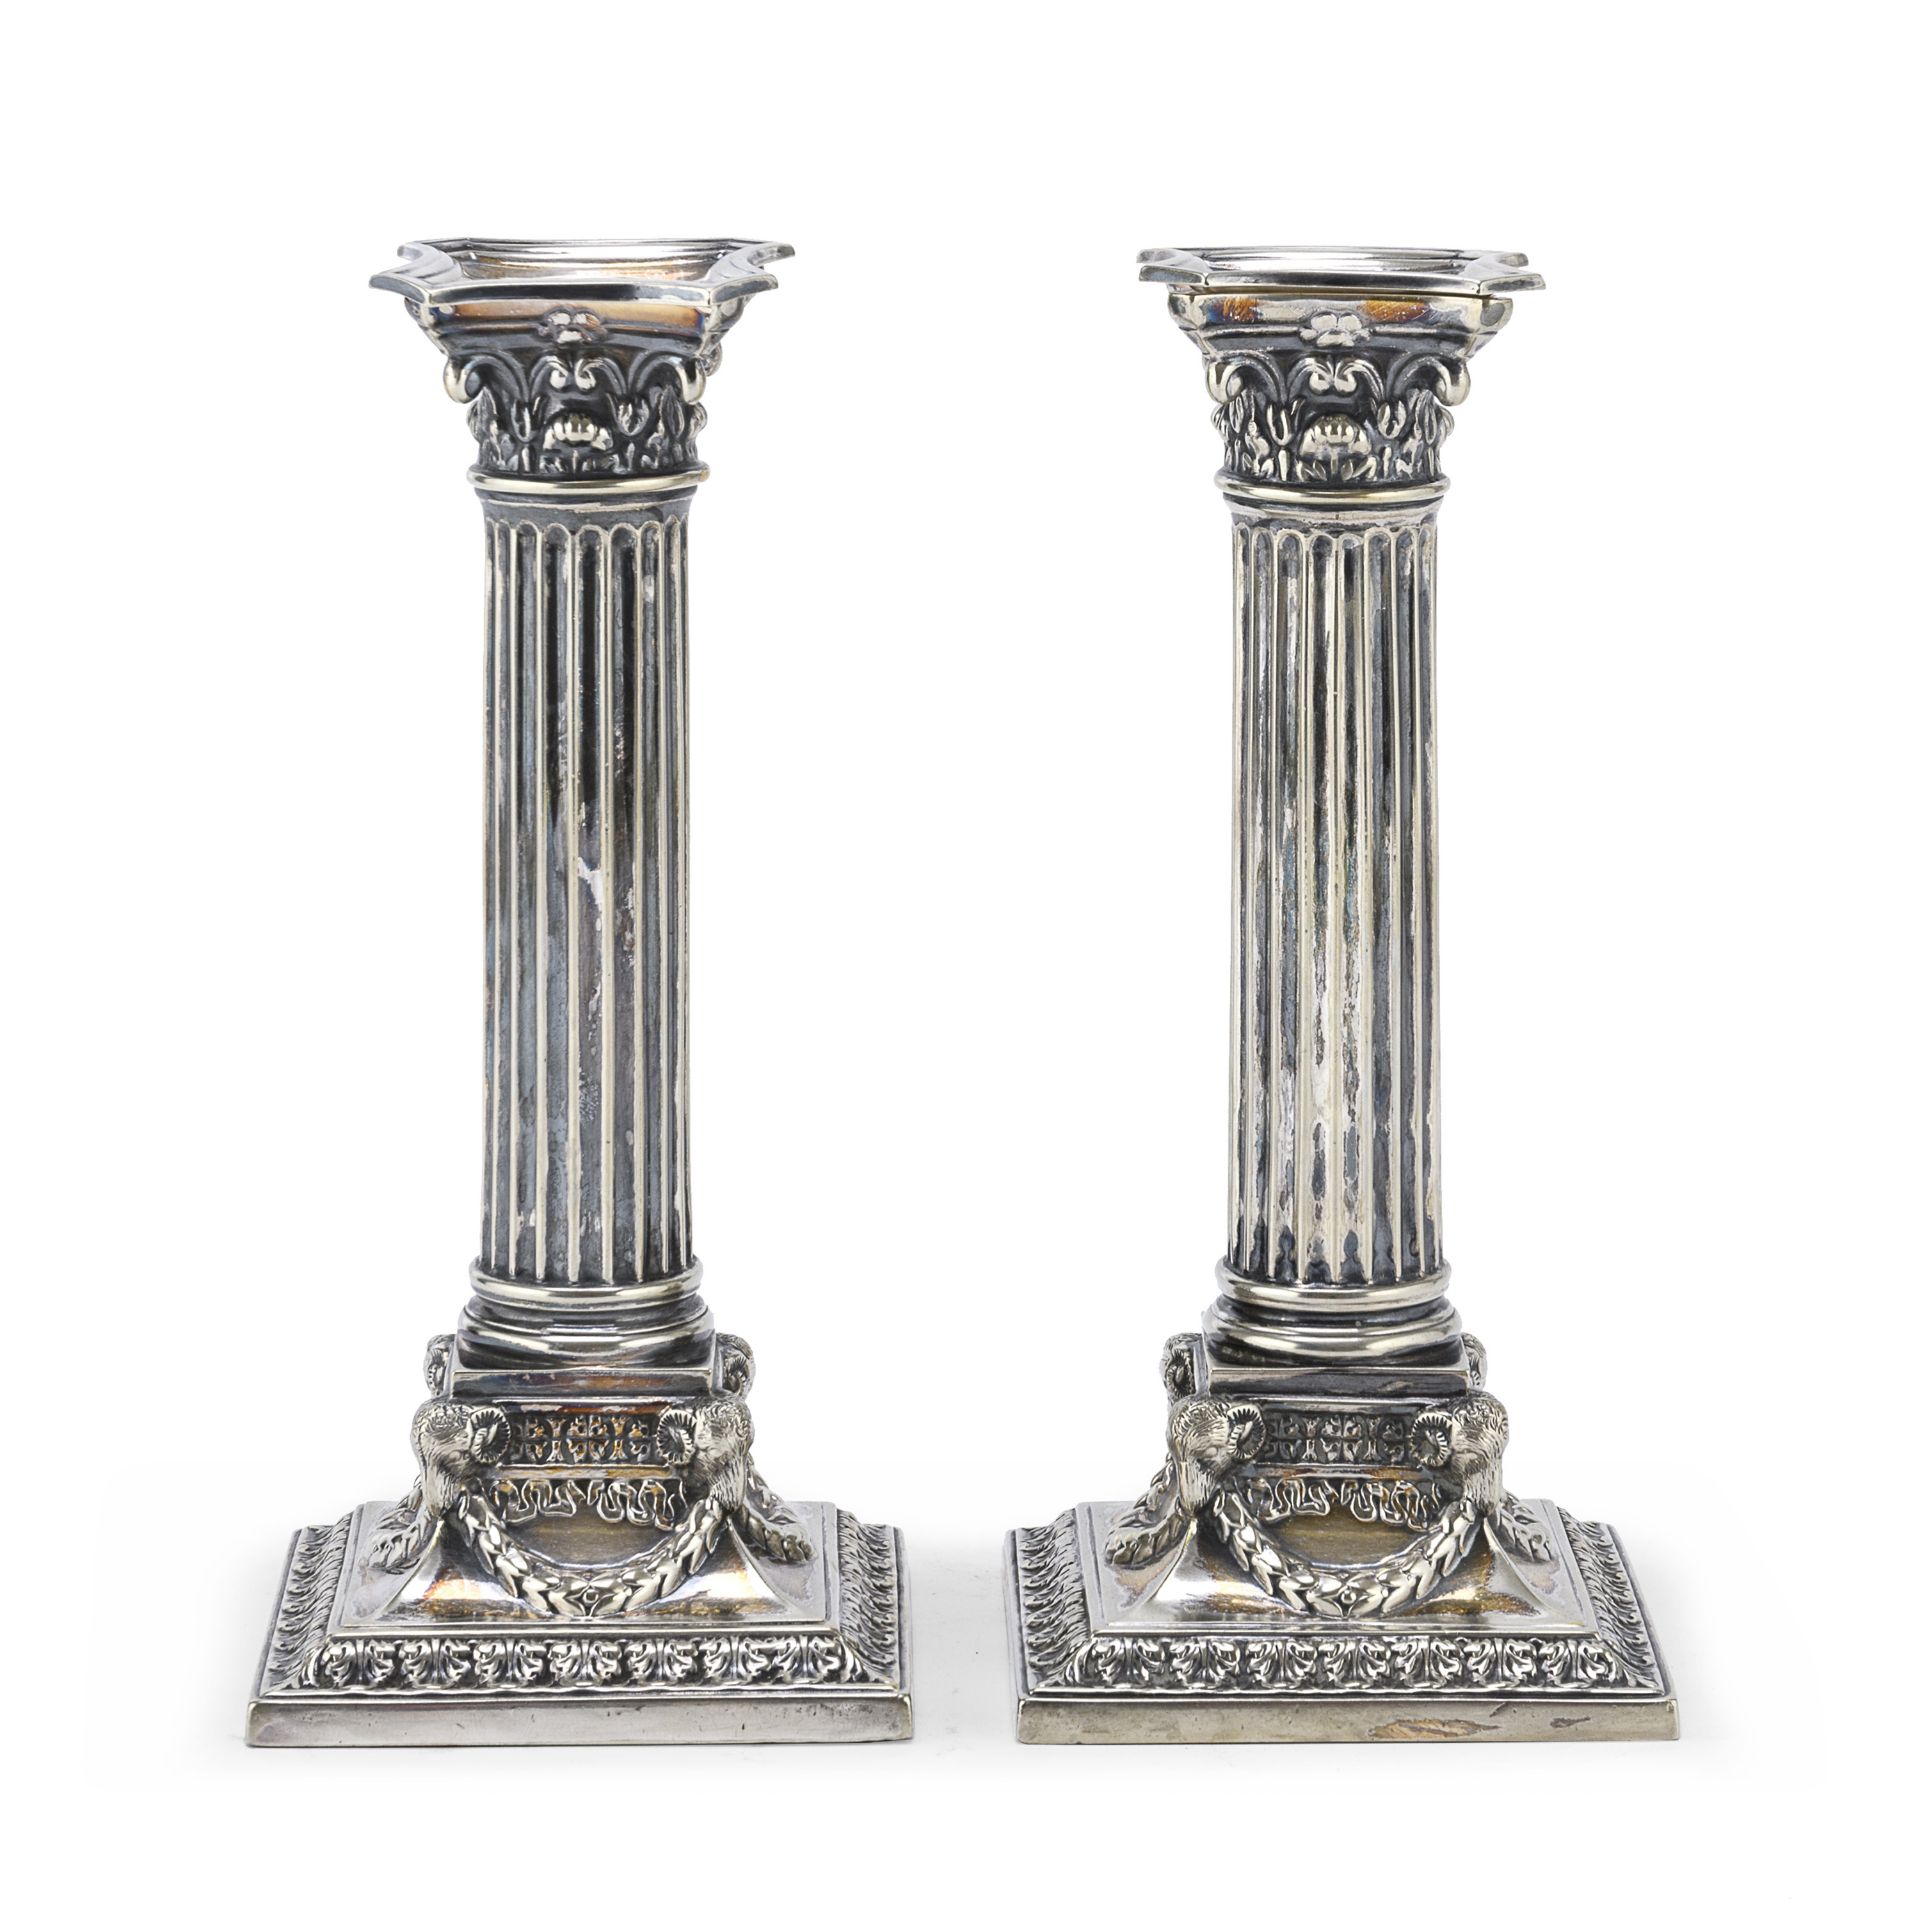 PAIR OF SHEFFIELD CANDLESTICKS ENGLAND LATE 19TH CENTURY